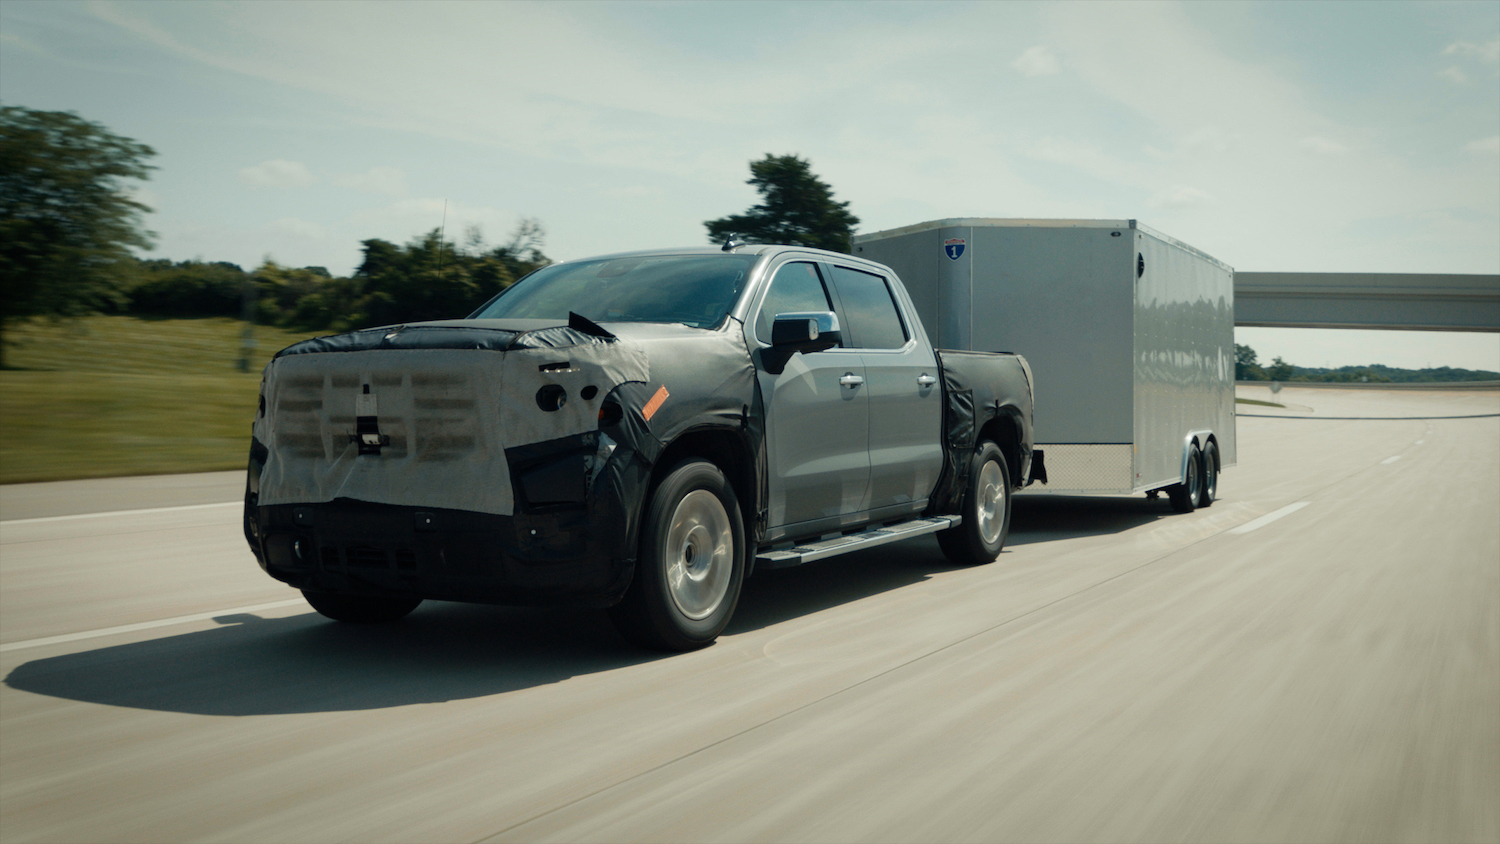 Gray, self driving truck towing a trailer without driver input.